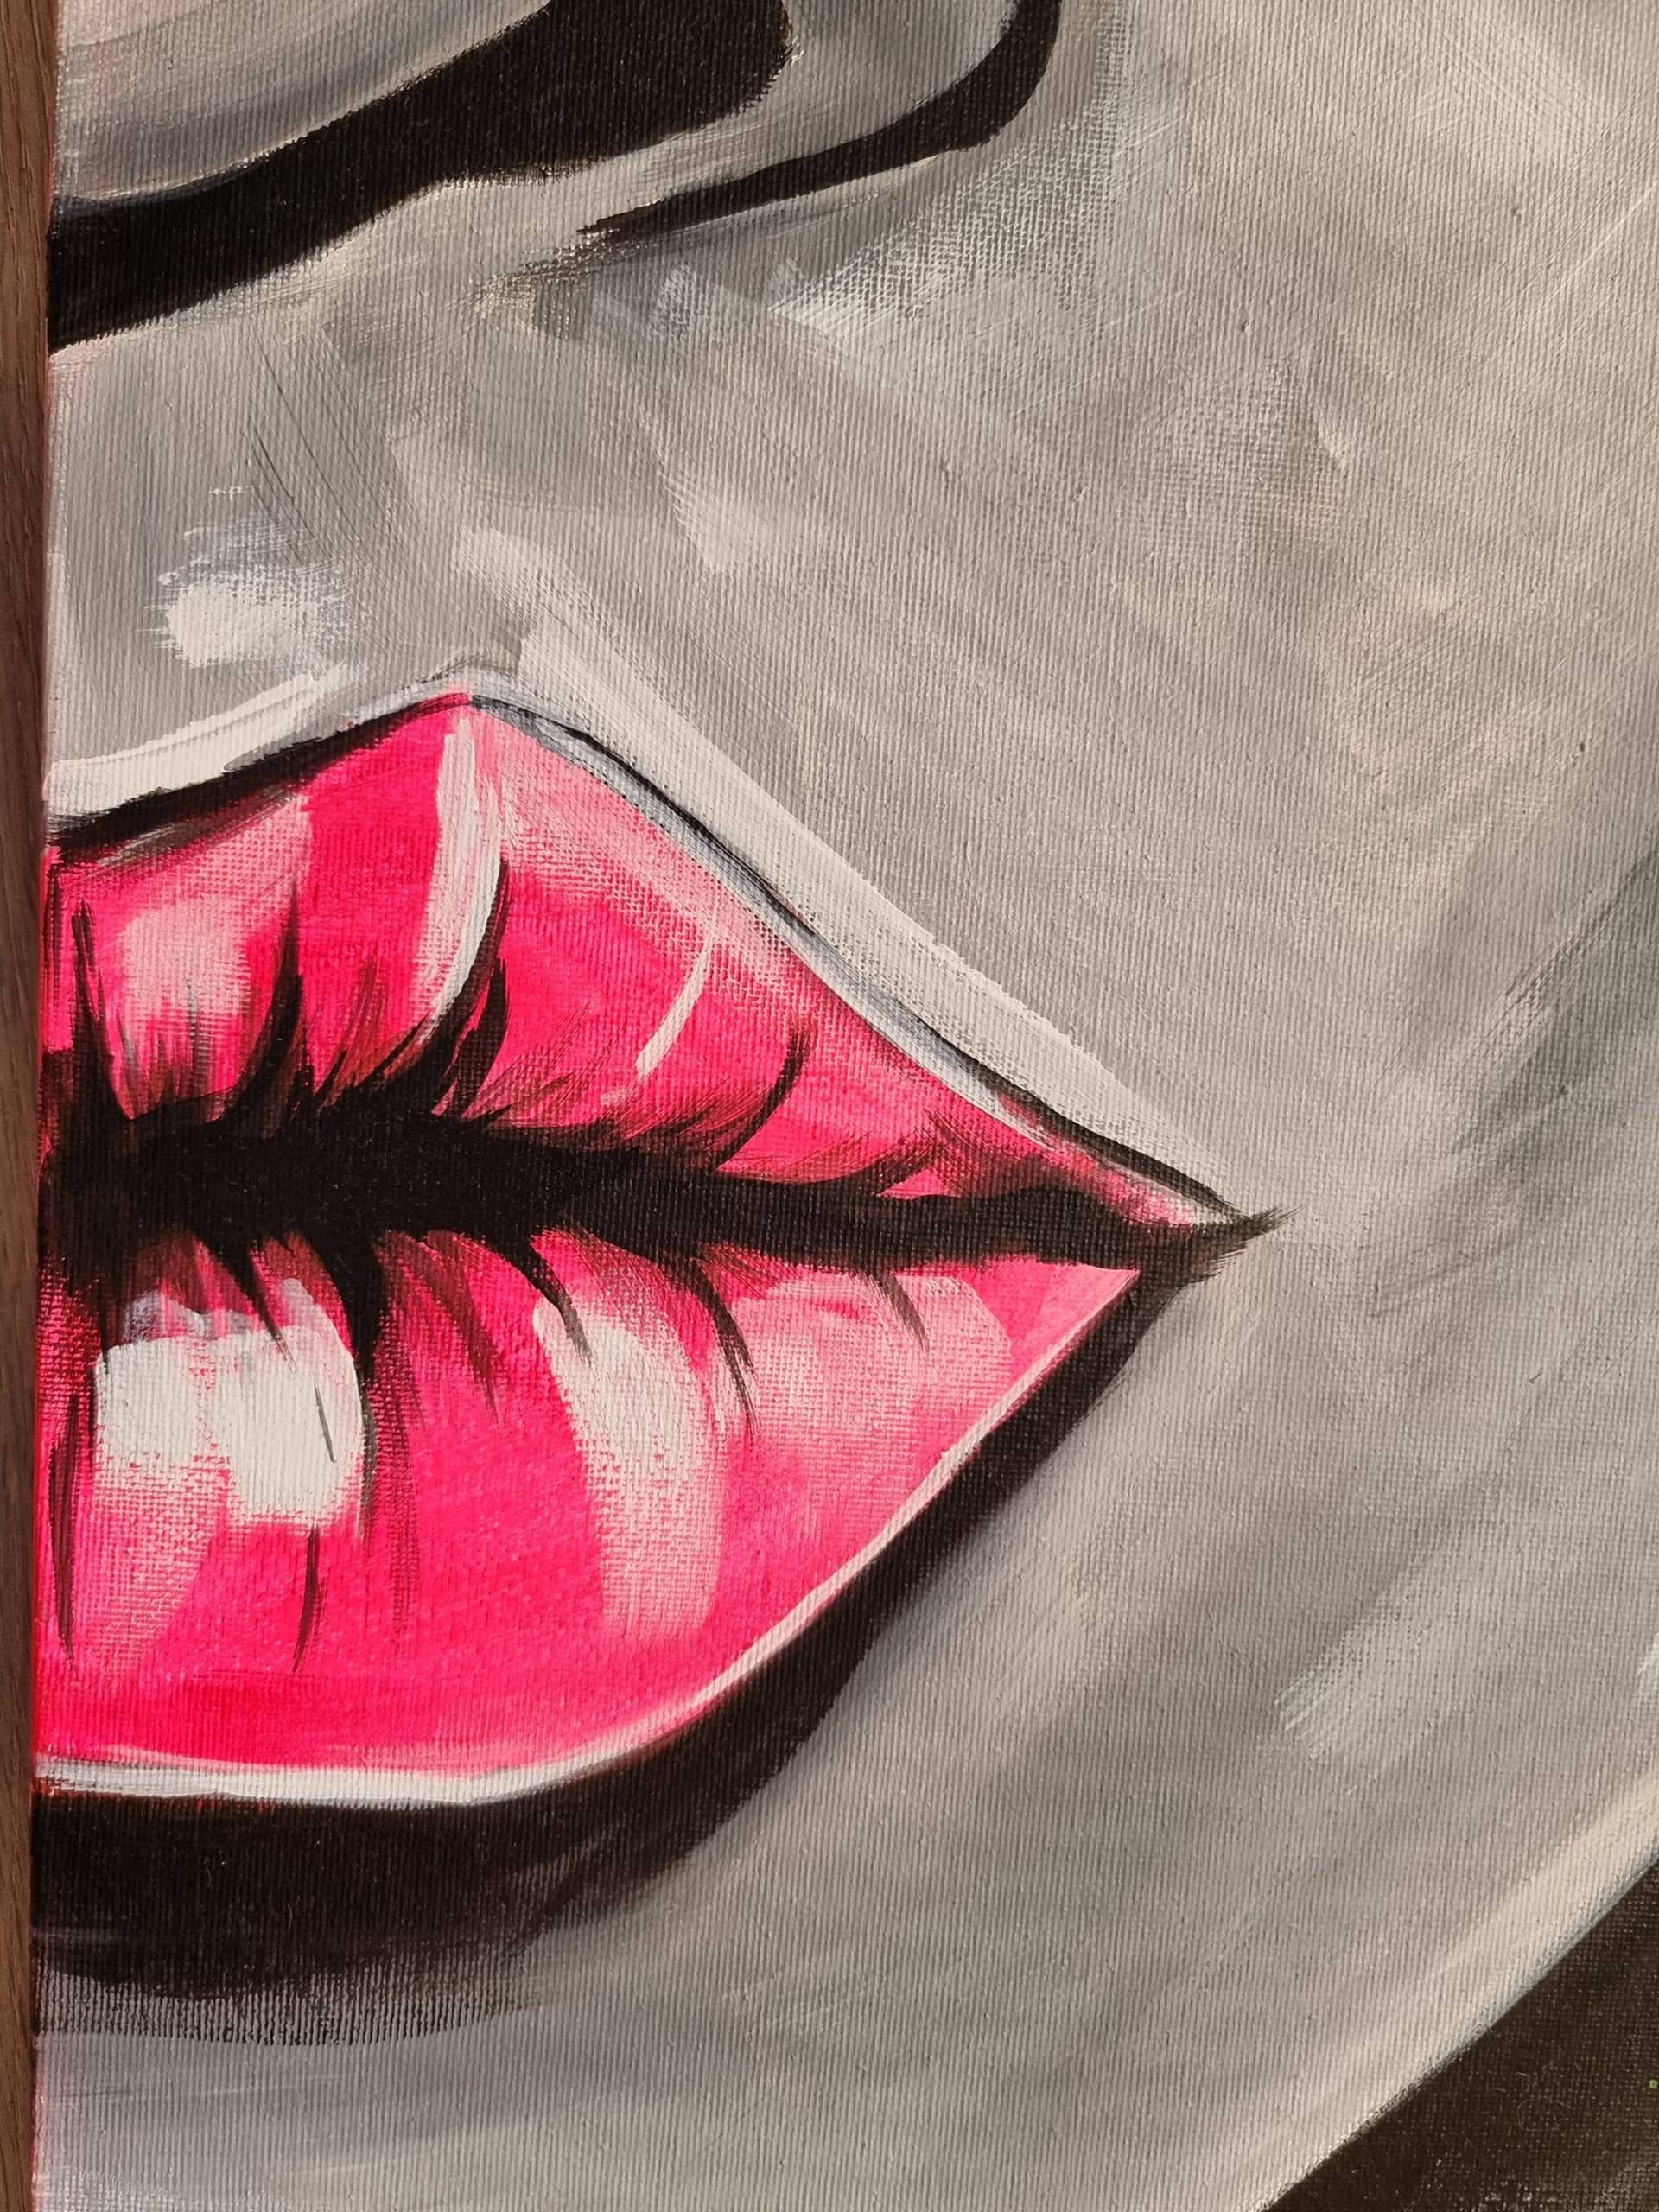 LOUIS PINK LIPS by Alla Grande (2019) : Painting Lacquer on Canvas